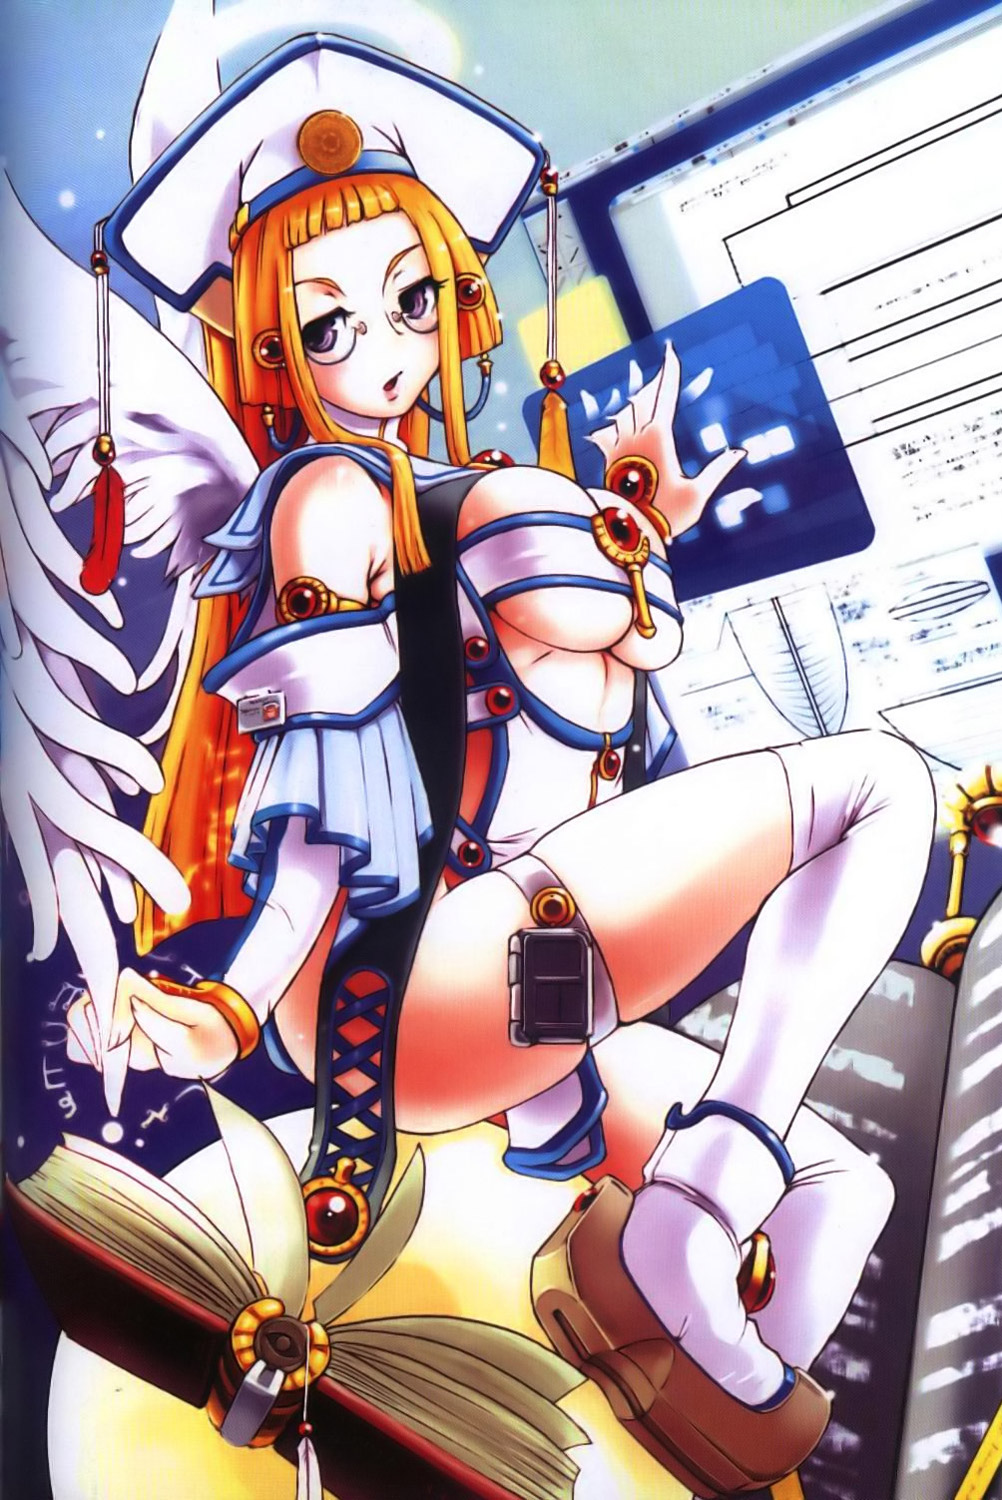 Angel and devil encyclopedia: dark and light side books image by Various Artists